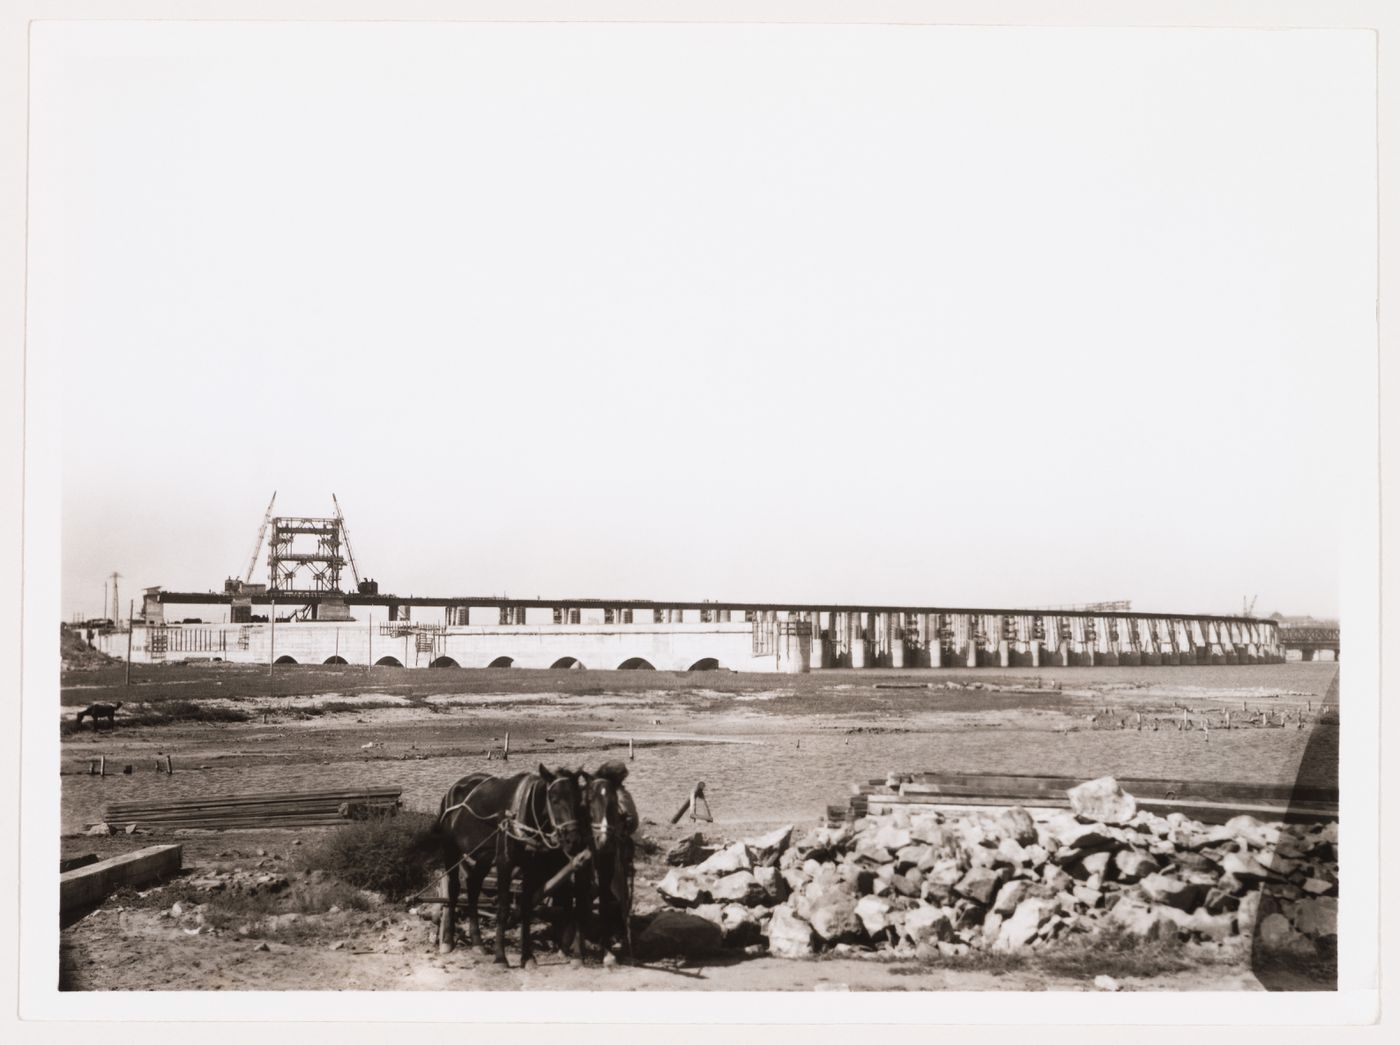 View of Dnieper Hydroelectric Power Station under construction, Zaporozhe, Soviet Union (now in Ukraine)